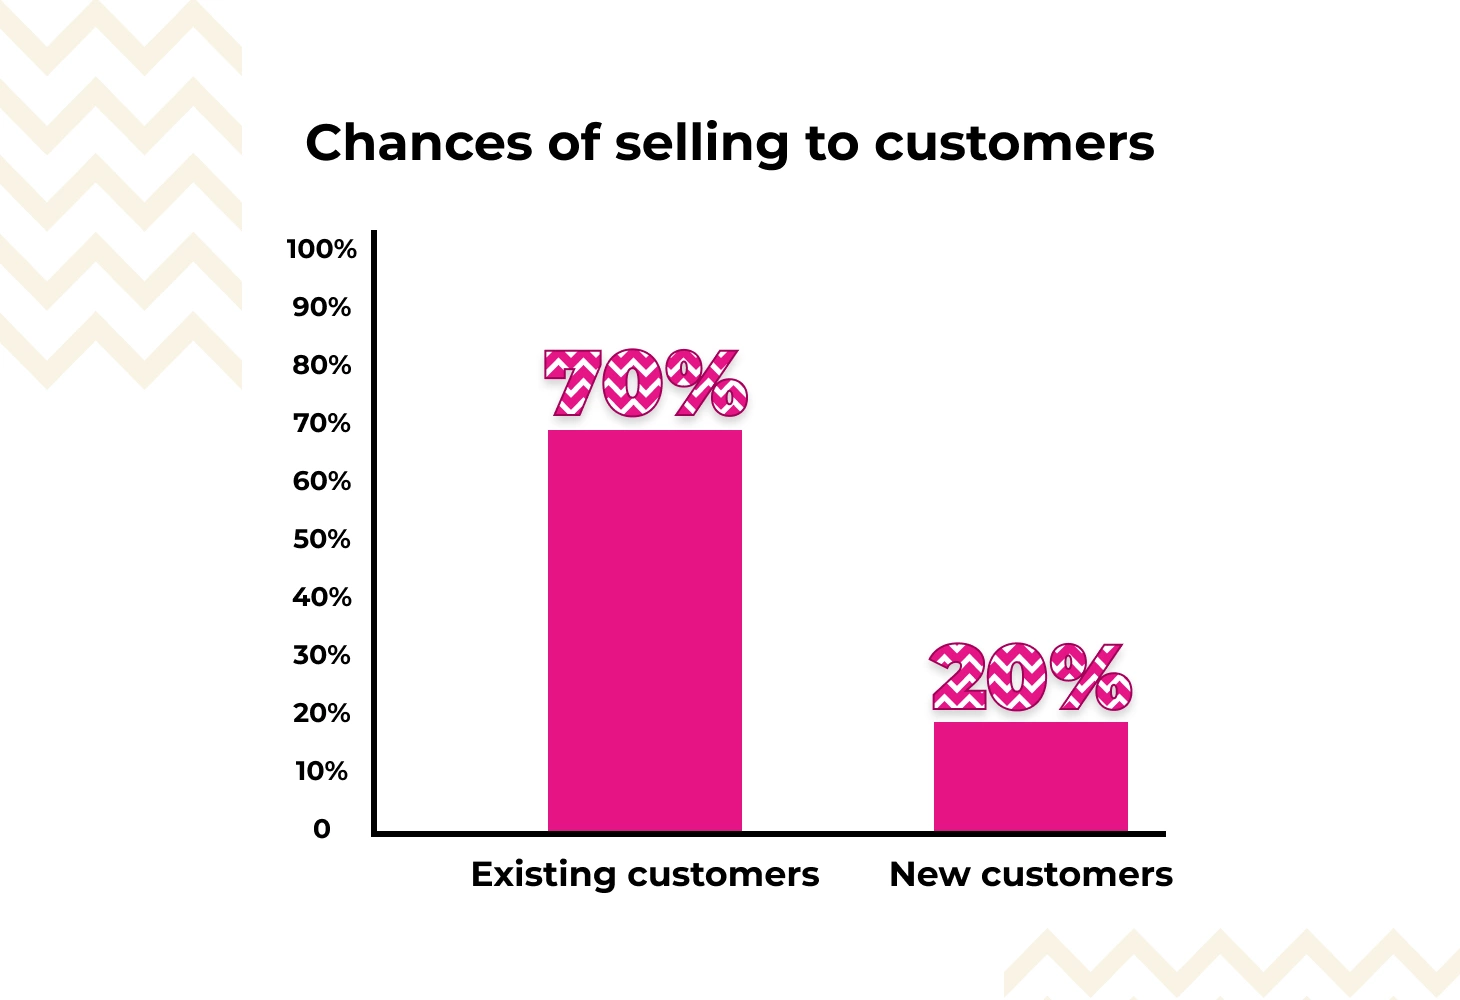 Chances of selling to existing vs. new customers graph